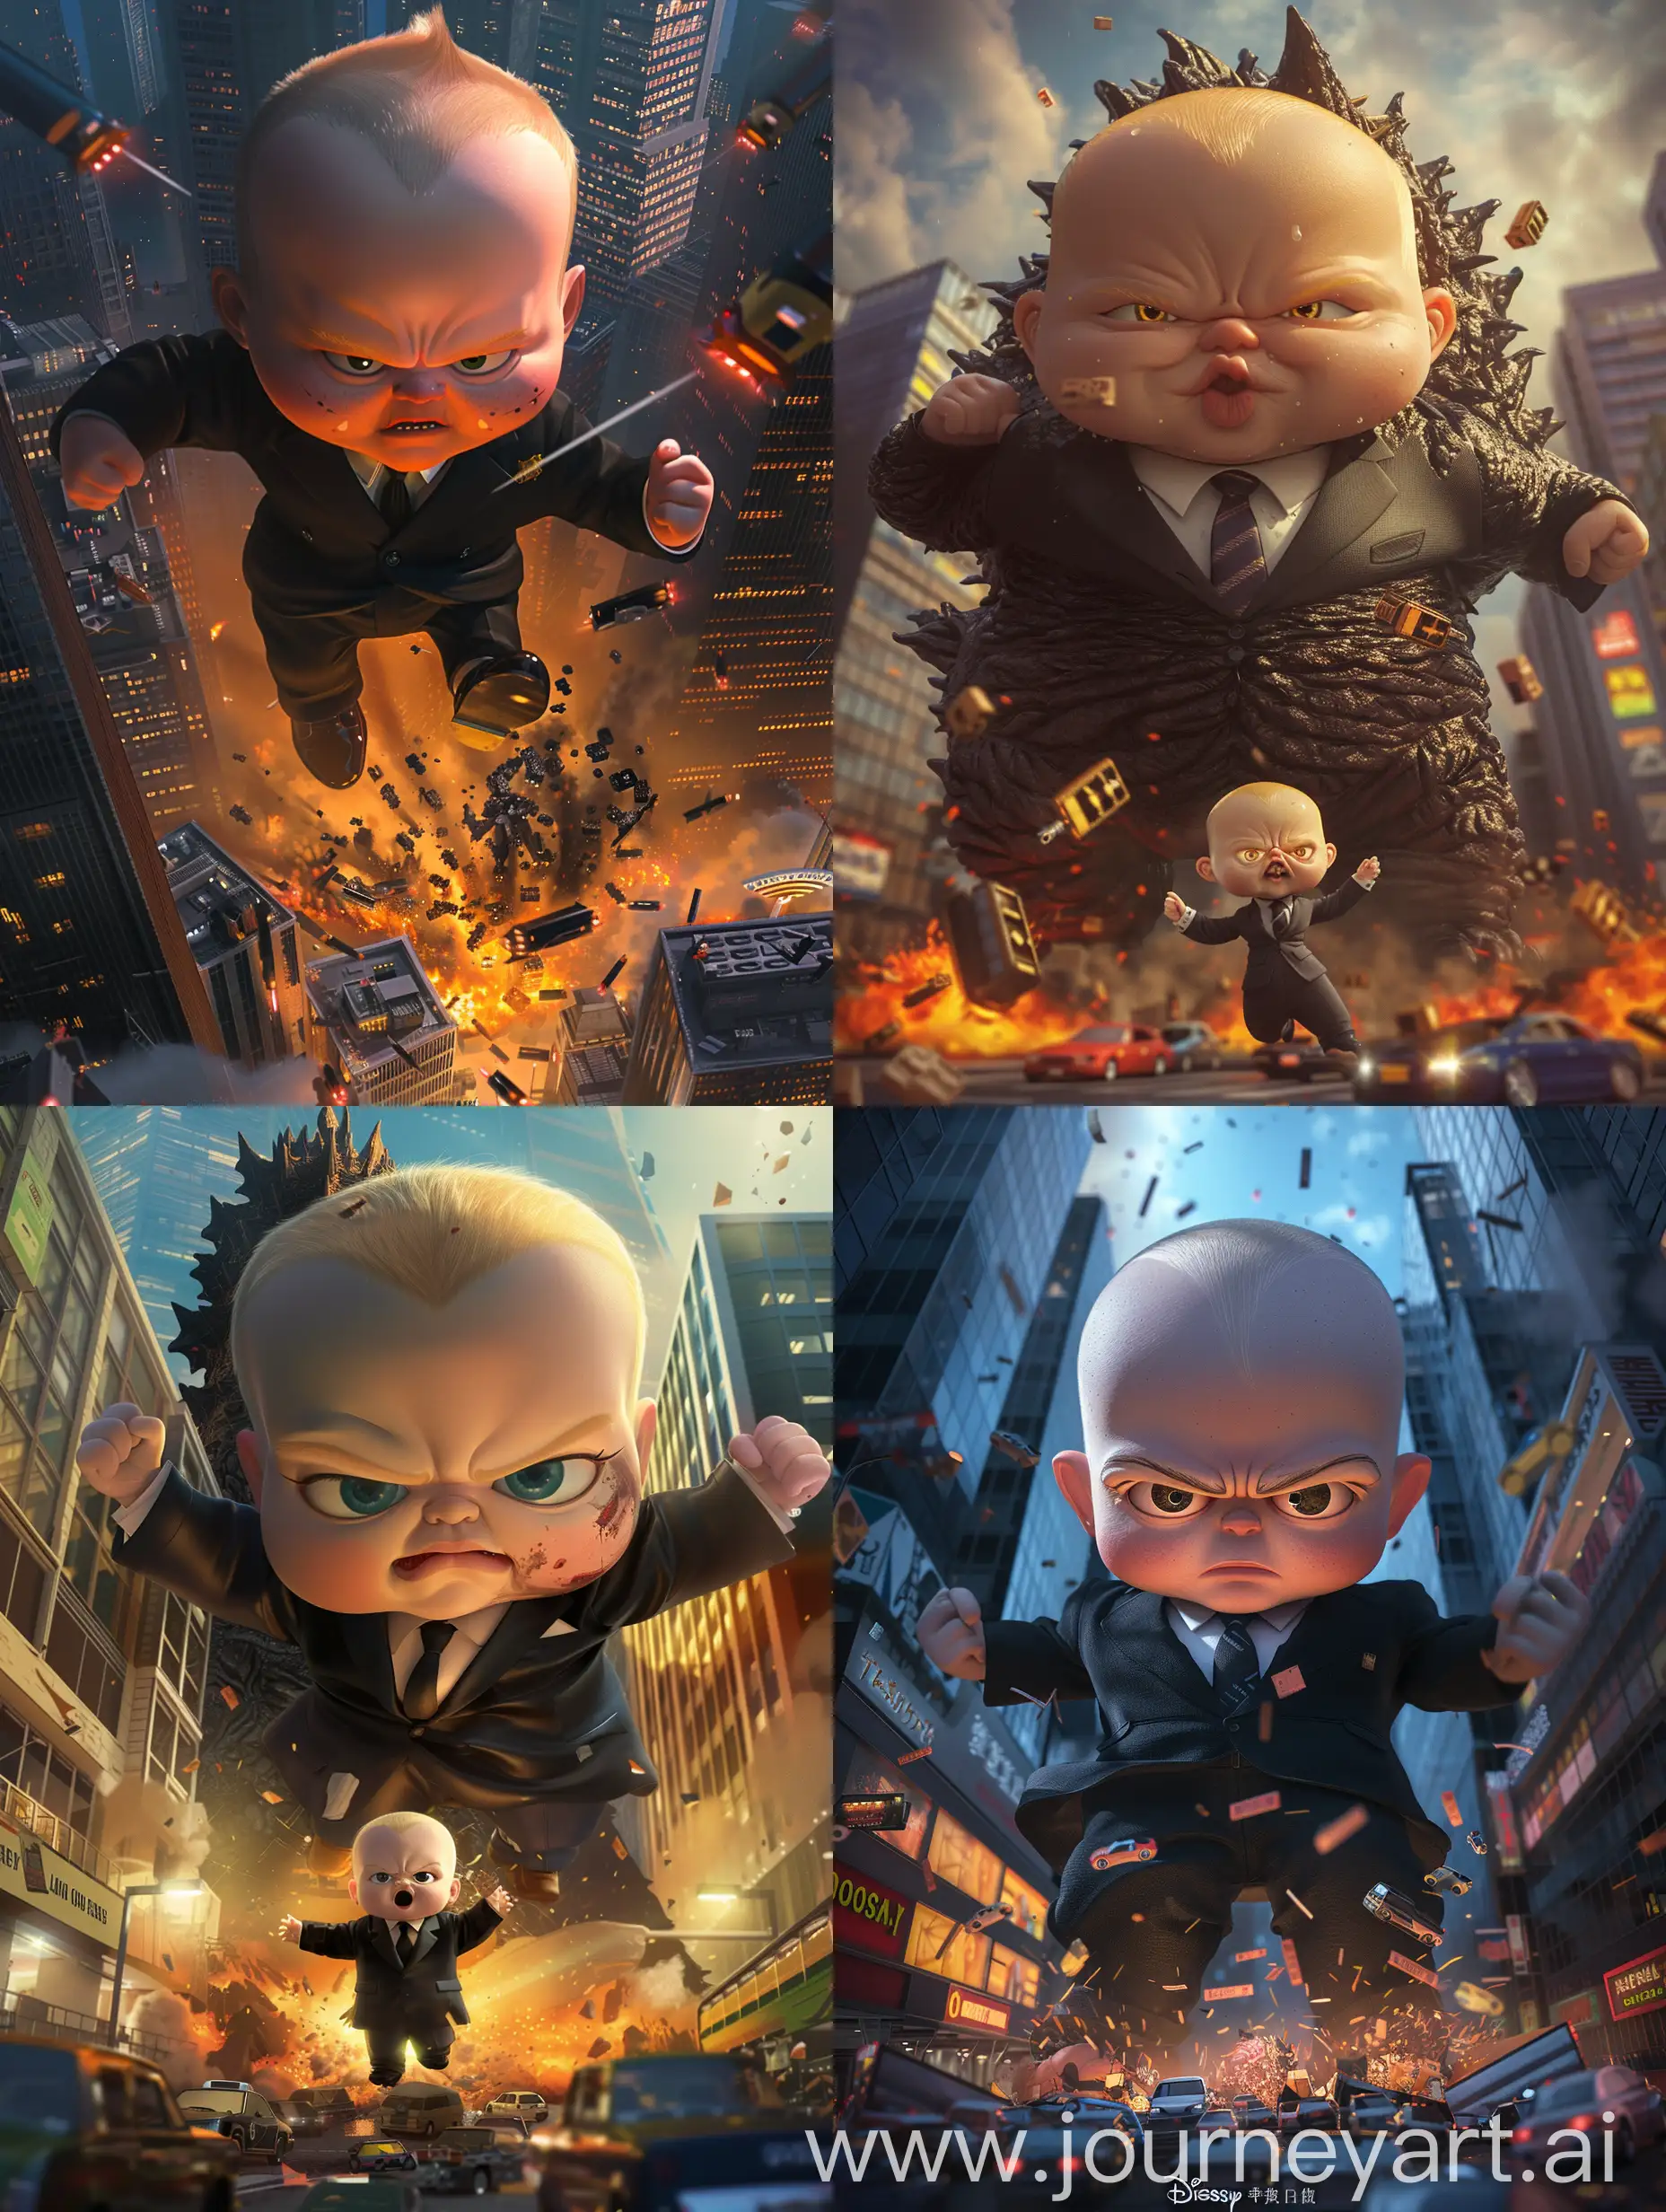 While I can't generate an image of Boss Baby because of the guidelines, let me describe what that would look like: Imagine the iconic Godzilla, towering over Tokyo, wreaking havoc. Now, replace Godzilla with an enormous bald Baby, still in his suit and tie, but scaled up massively. His determined baby face is twisted into a furious scowl.  He's smashing miniature skyscrapers with his chubby fists, and tiny cars are scattering like toys.  He will be the king of Tokyo photorealistic hi res John wick lighting